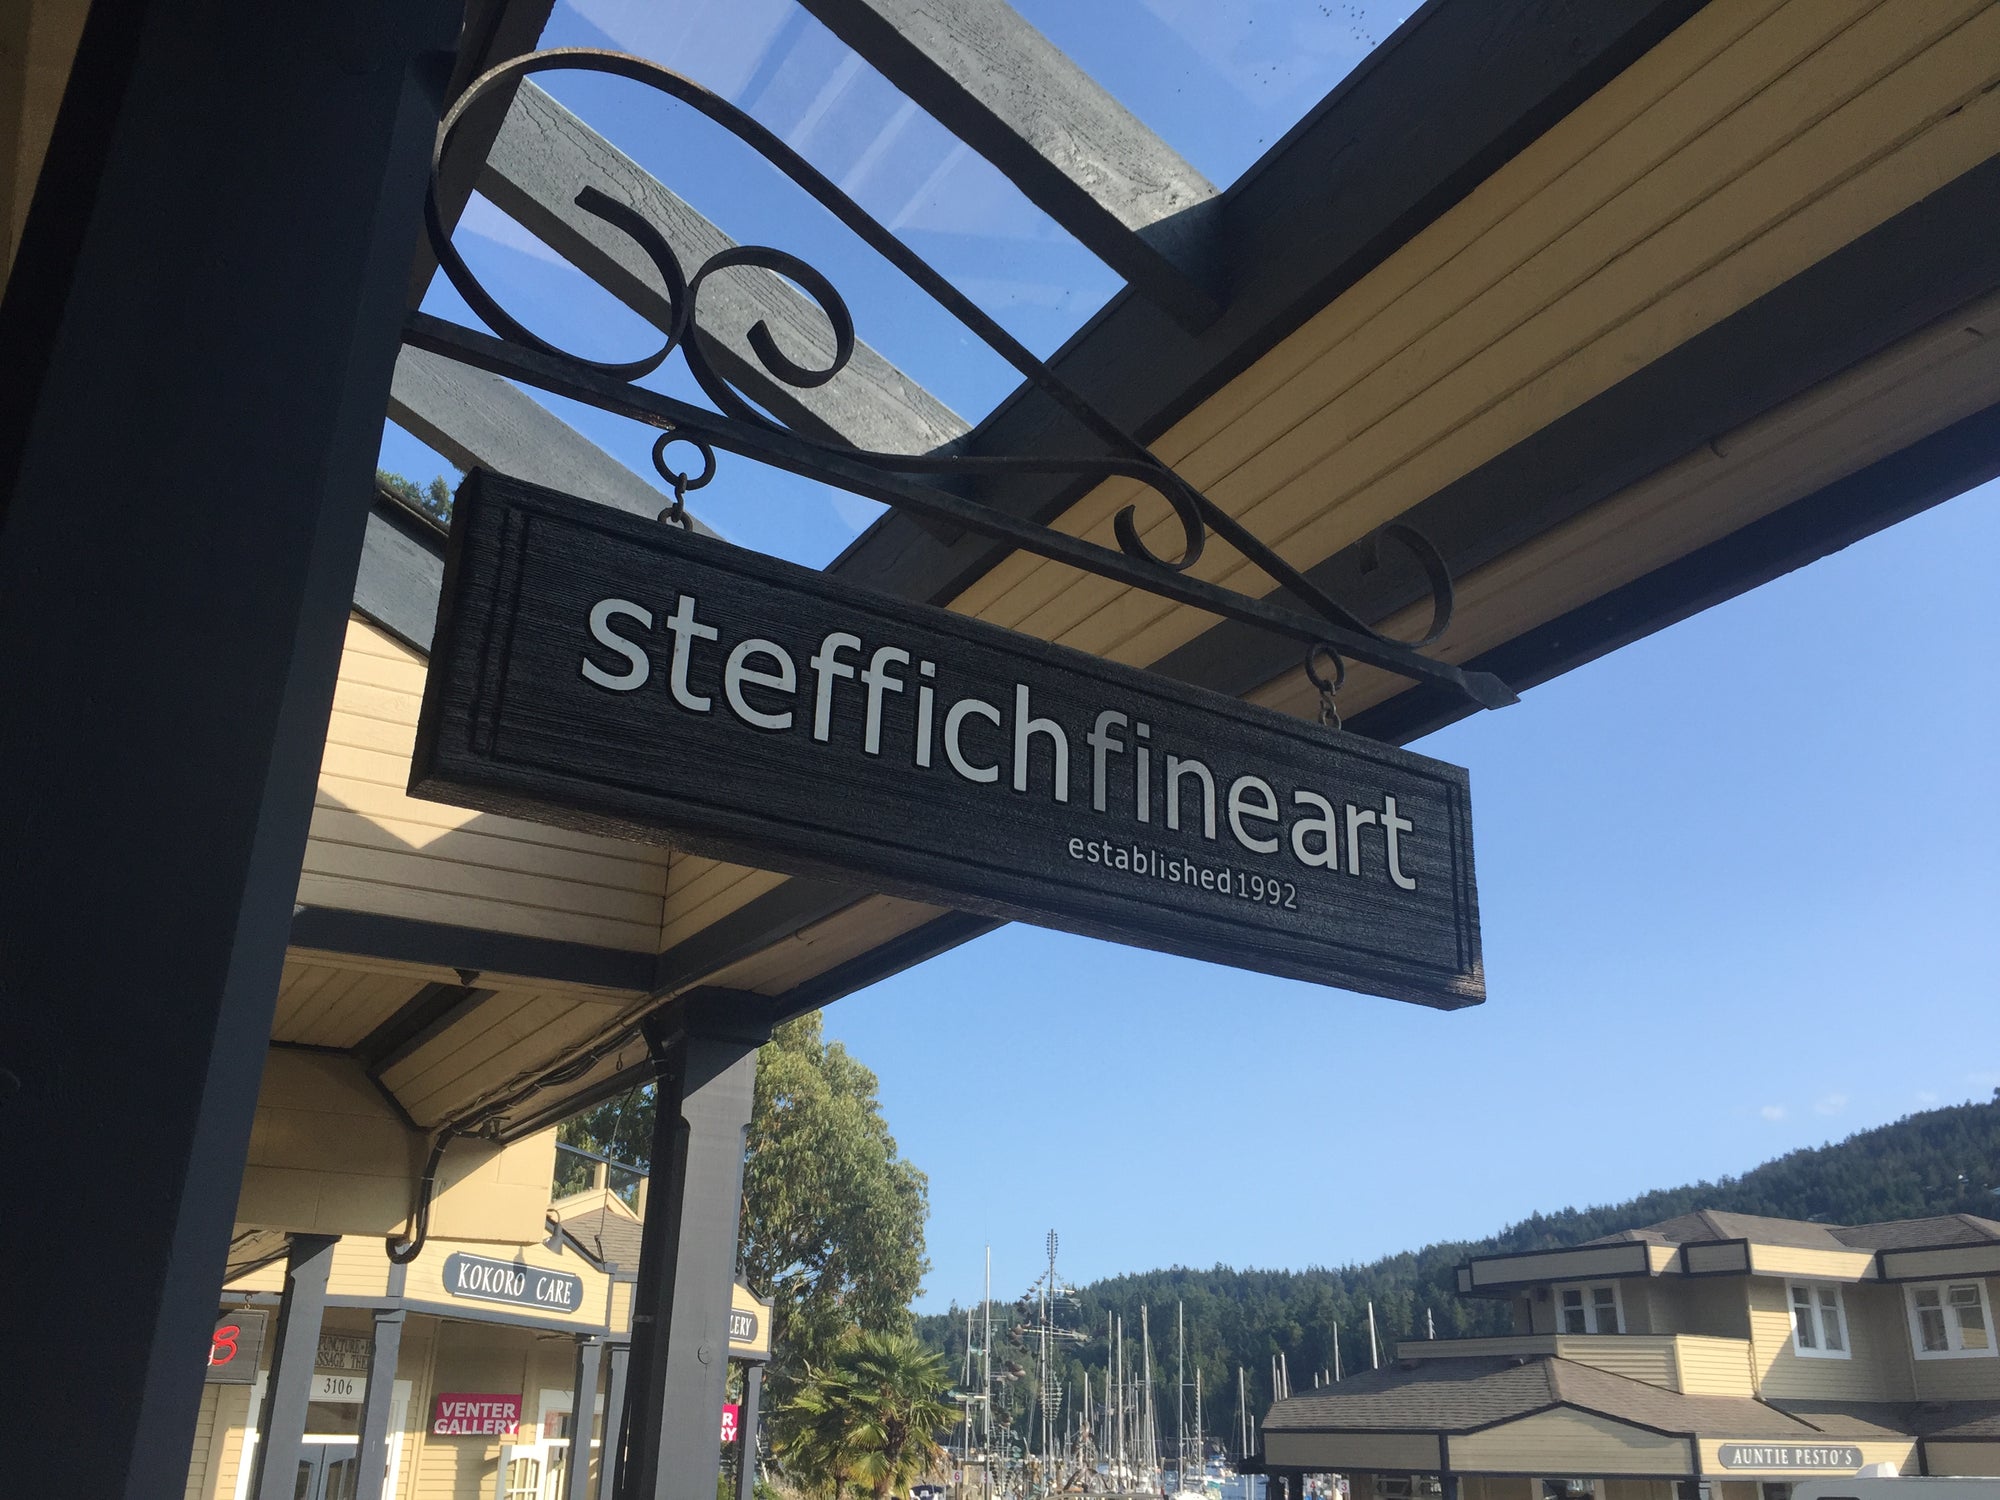 Steffich Fine Art sign outside on a blue sky day on salt spring island in British Columbia.